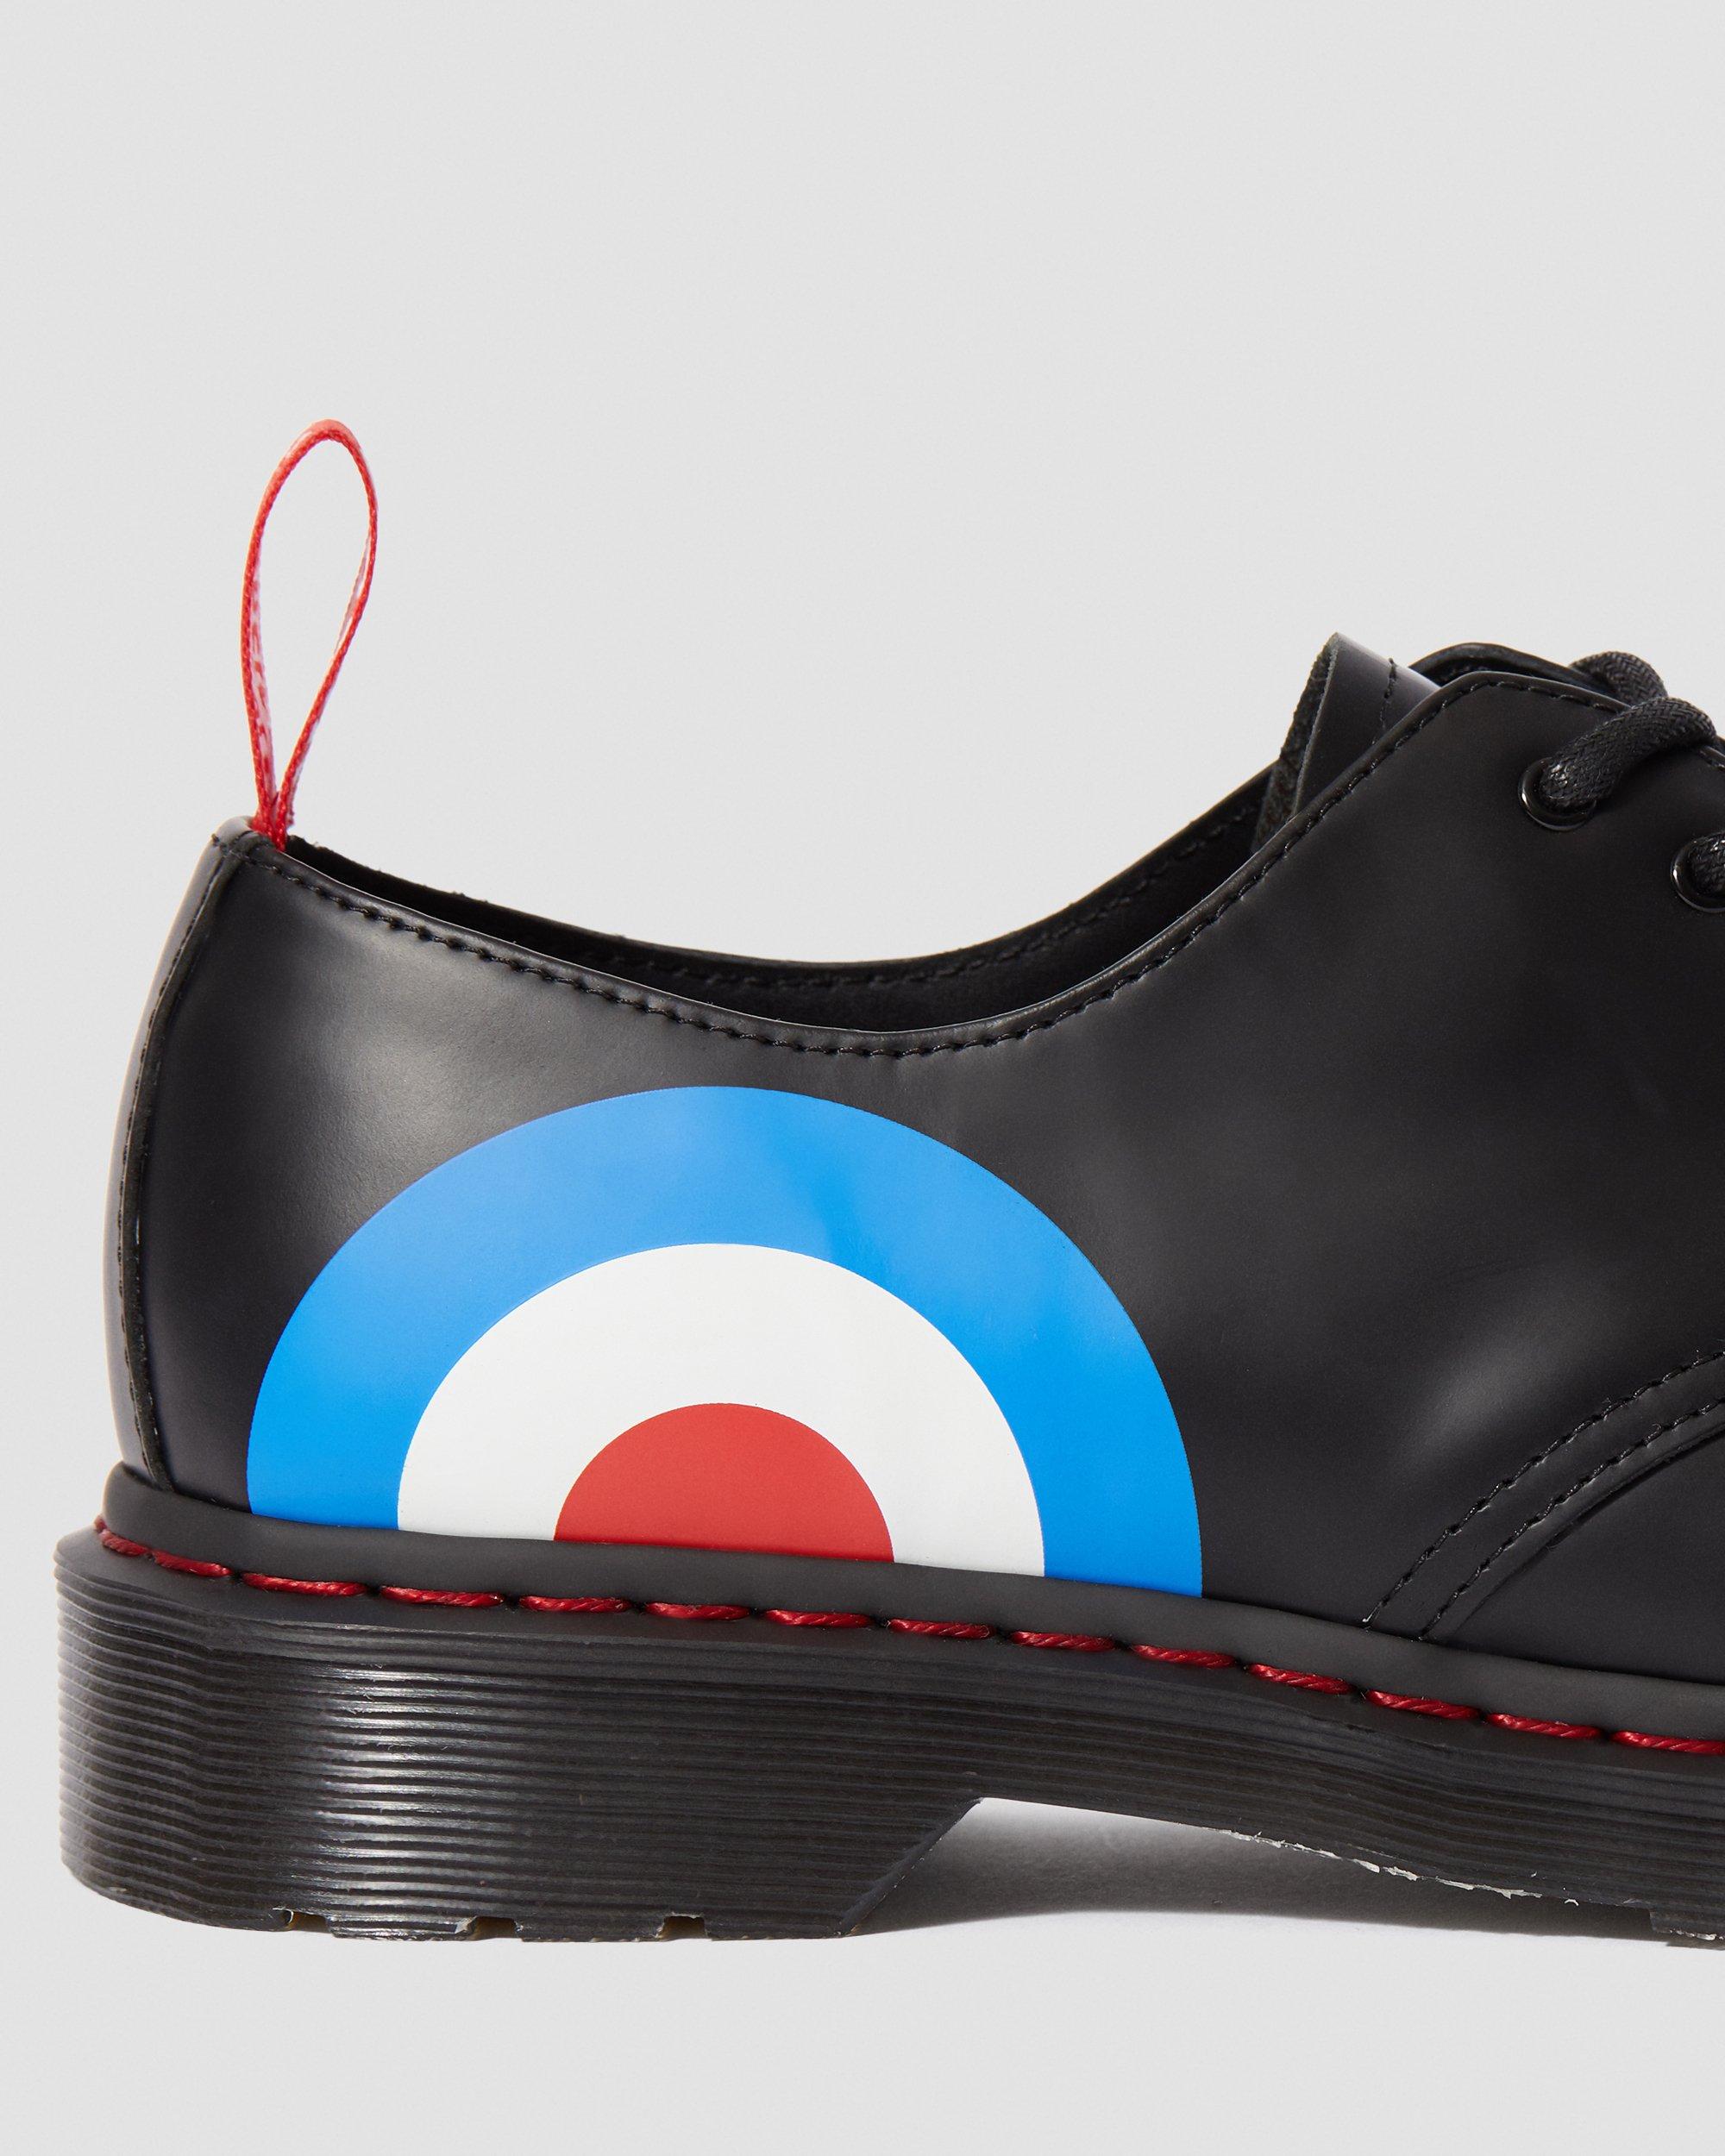 Martens 1461 THE WHO TARGET Smooth Black Leather Shoes 25269001 Dr ALL SIZES 